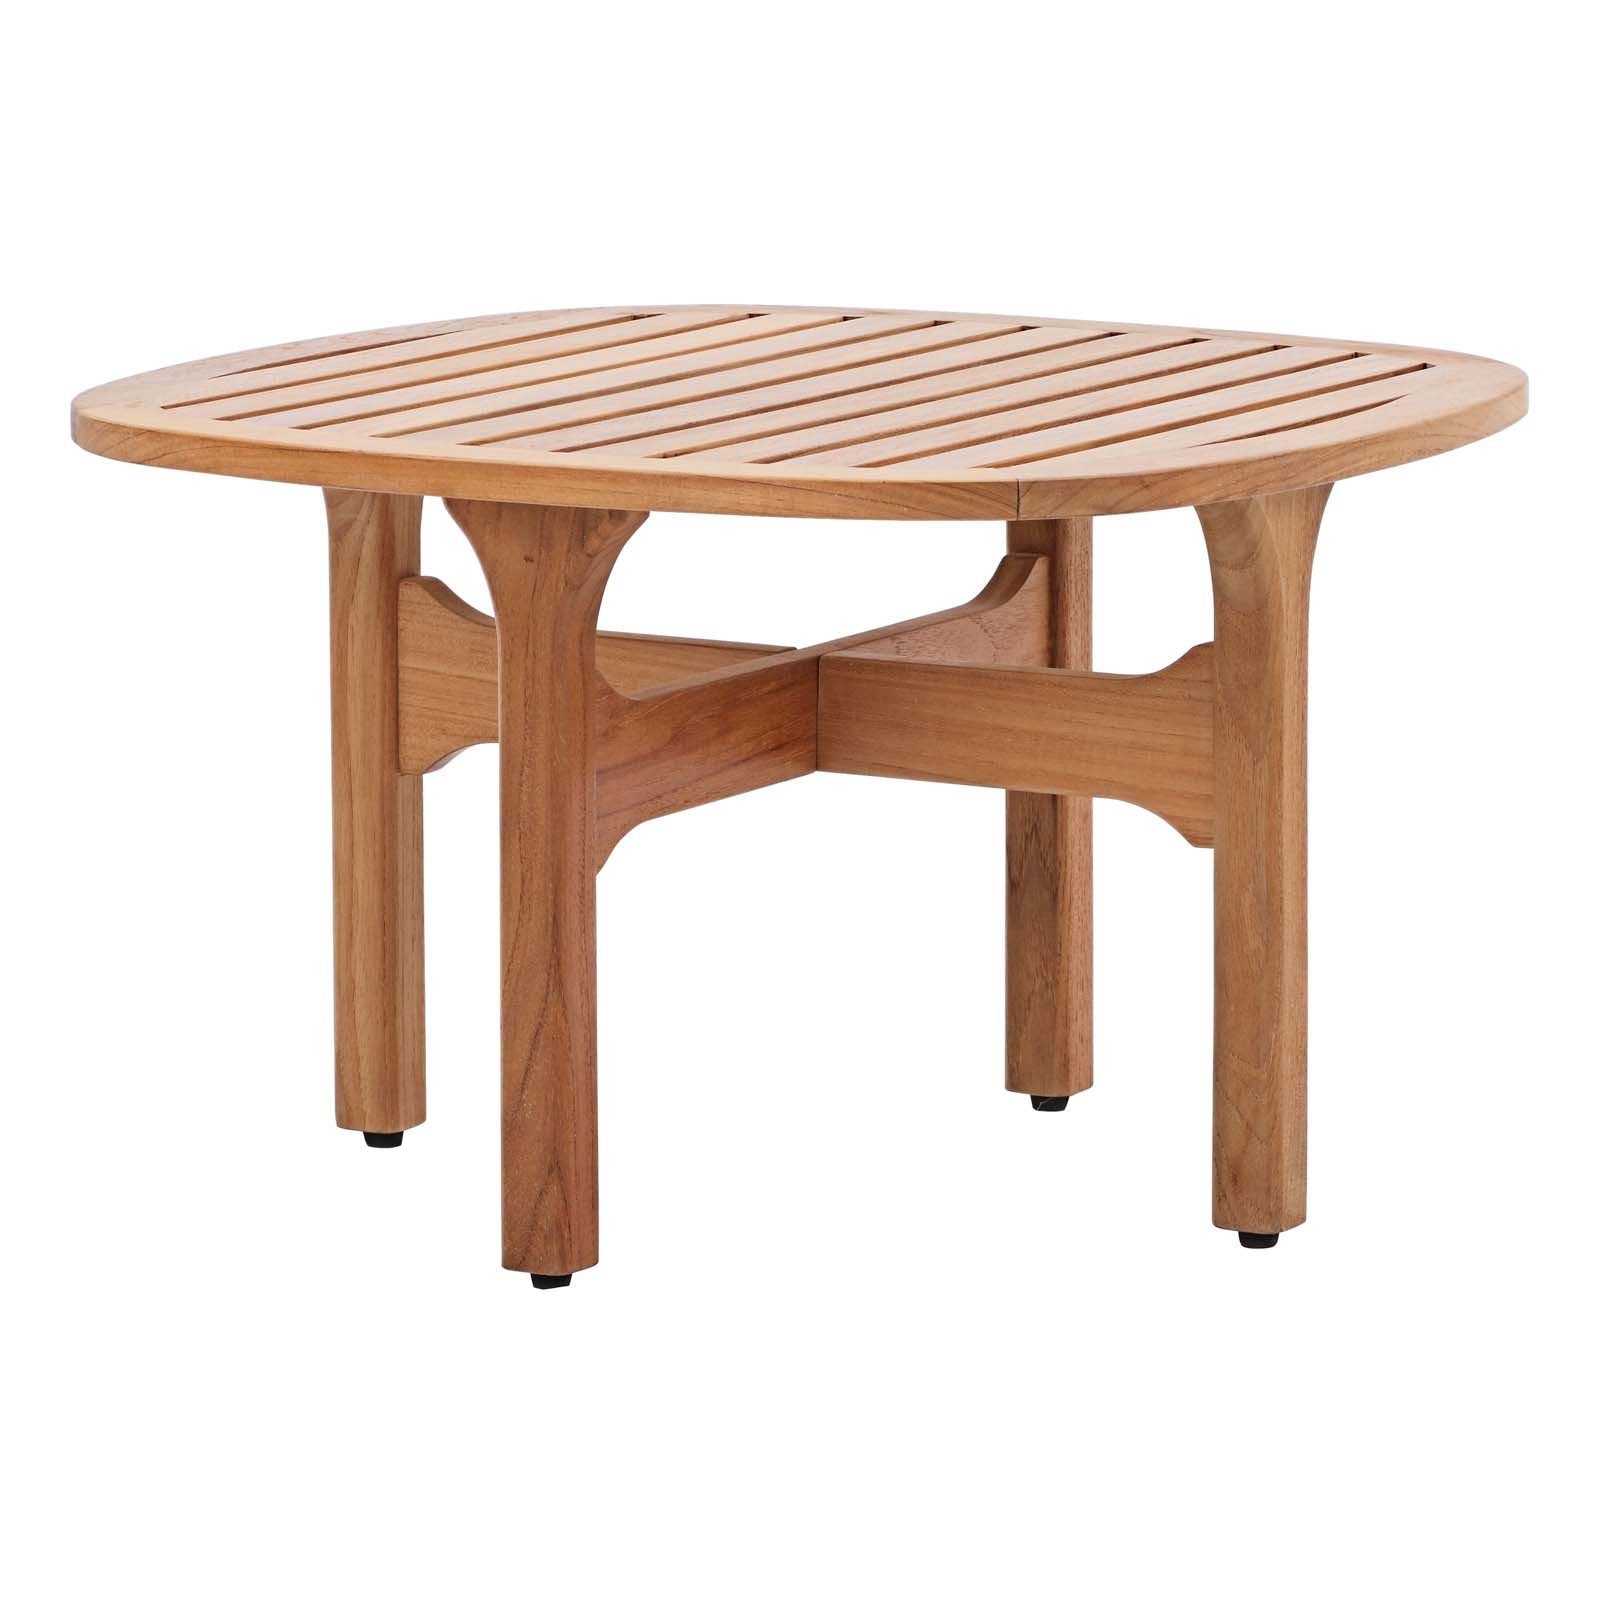 Saratoga Outdoor Patio Teak Coffee Table in Natural